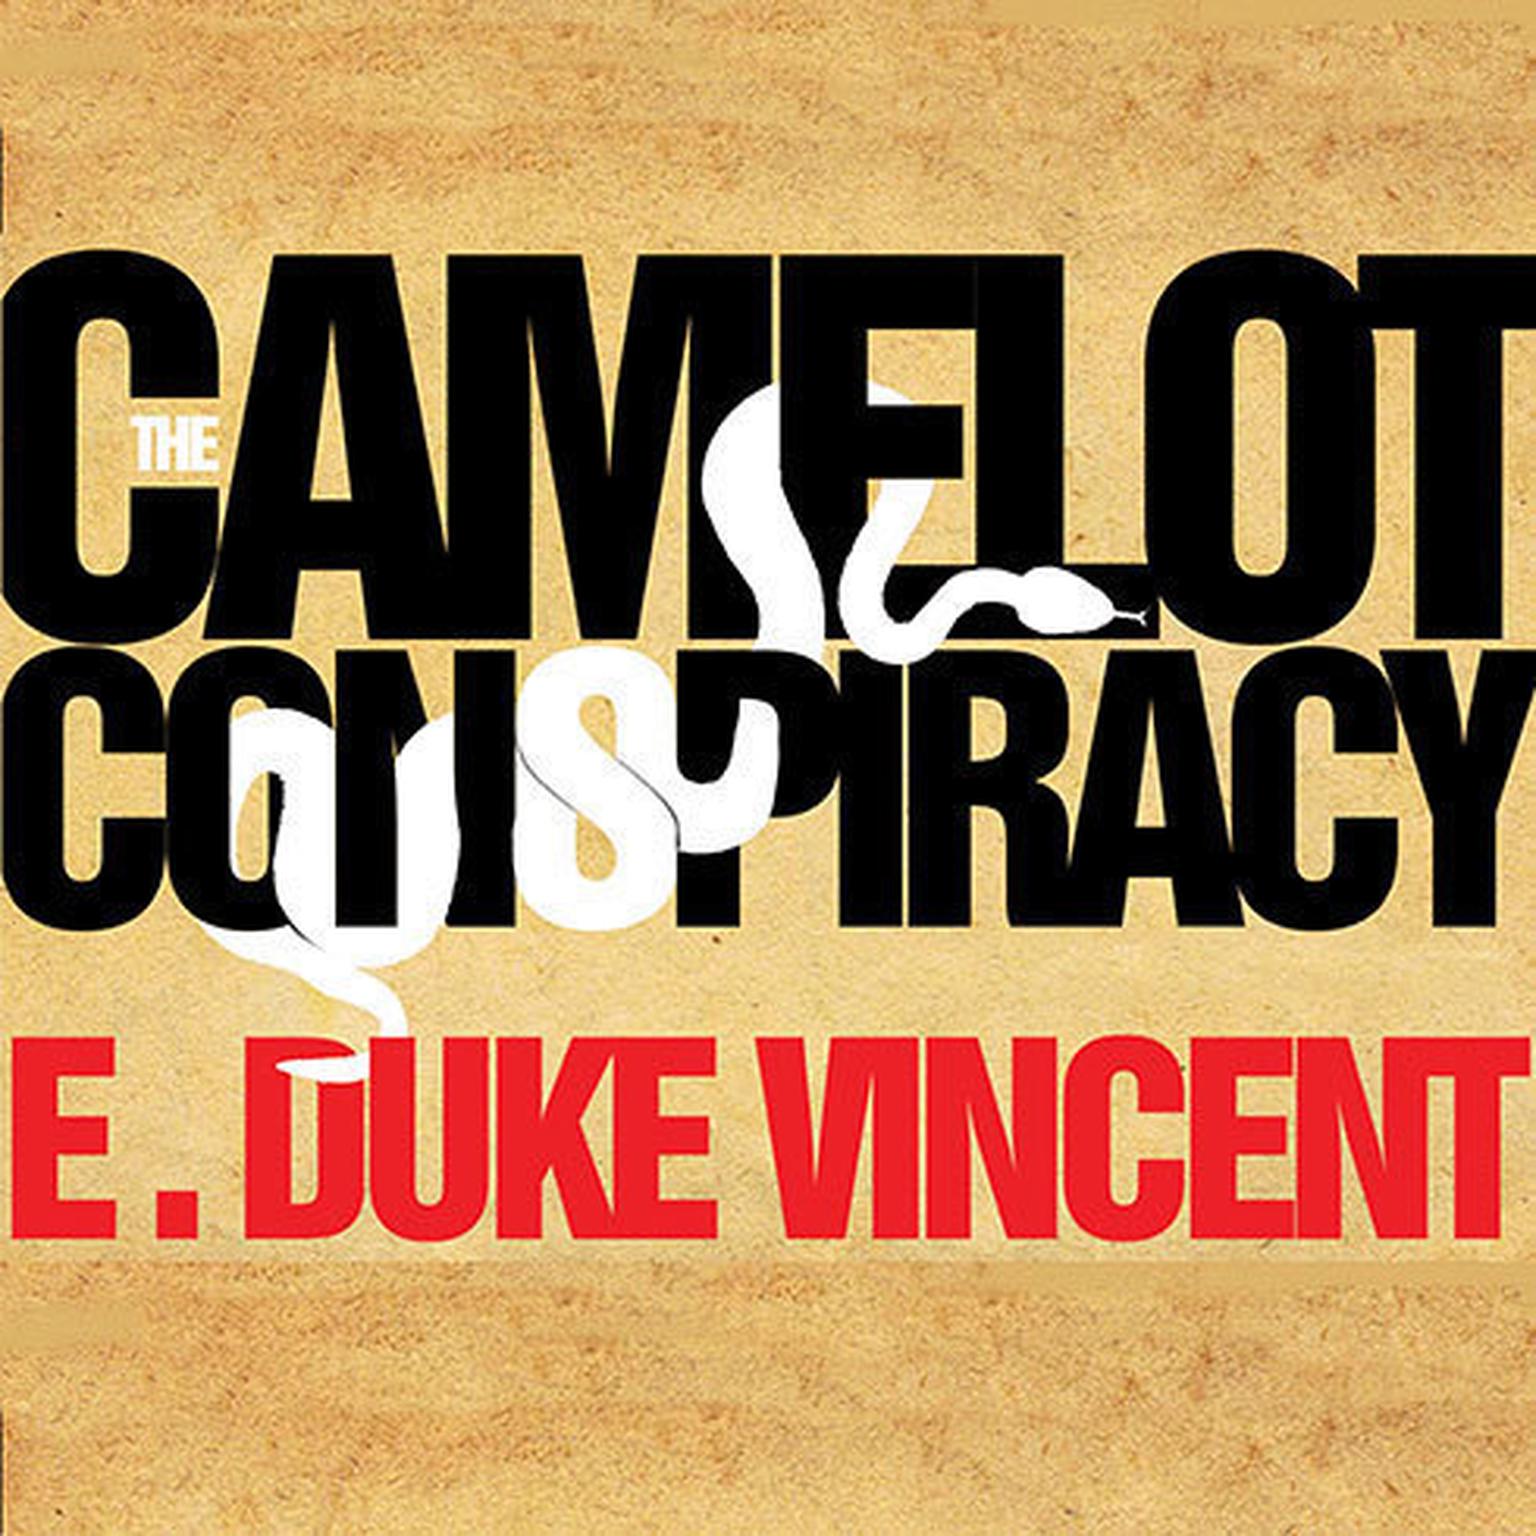 The Camelot Conspiracy: The Kennedys, Castro and the CIA: A Novel Audiobook, by E. Duke Vincent